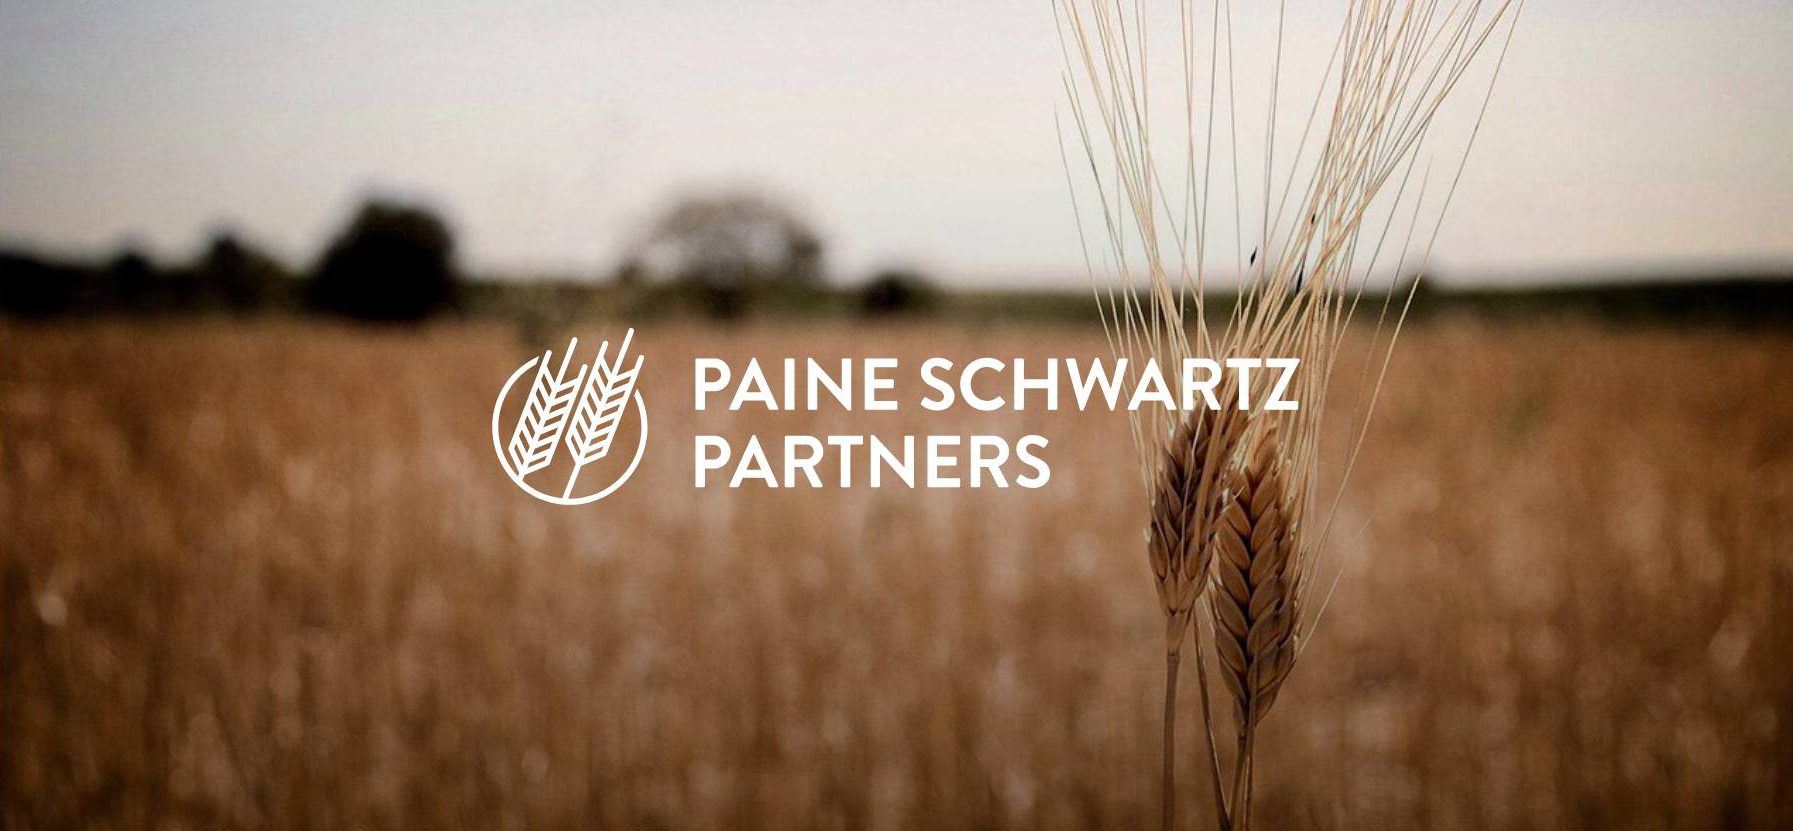 Paine Schwartz Partners Announces Team Member Promotions and Appointments@2x